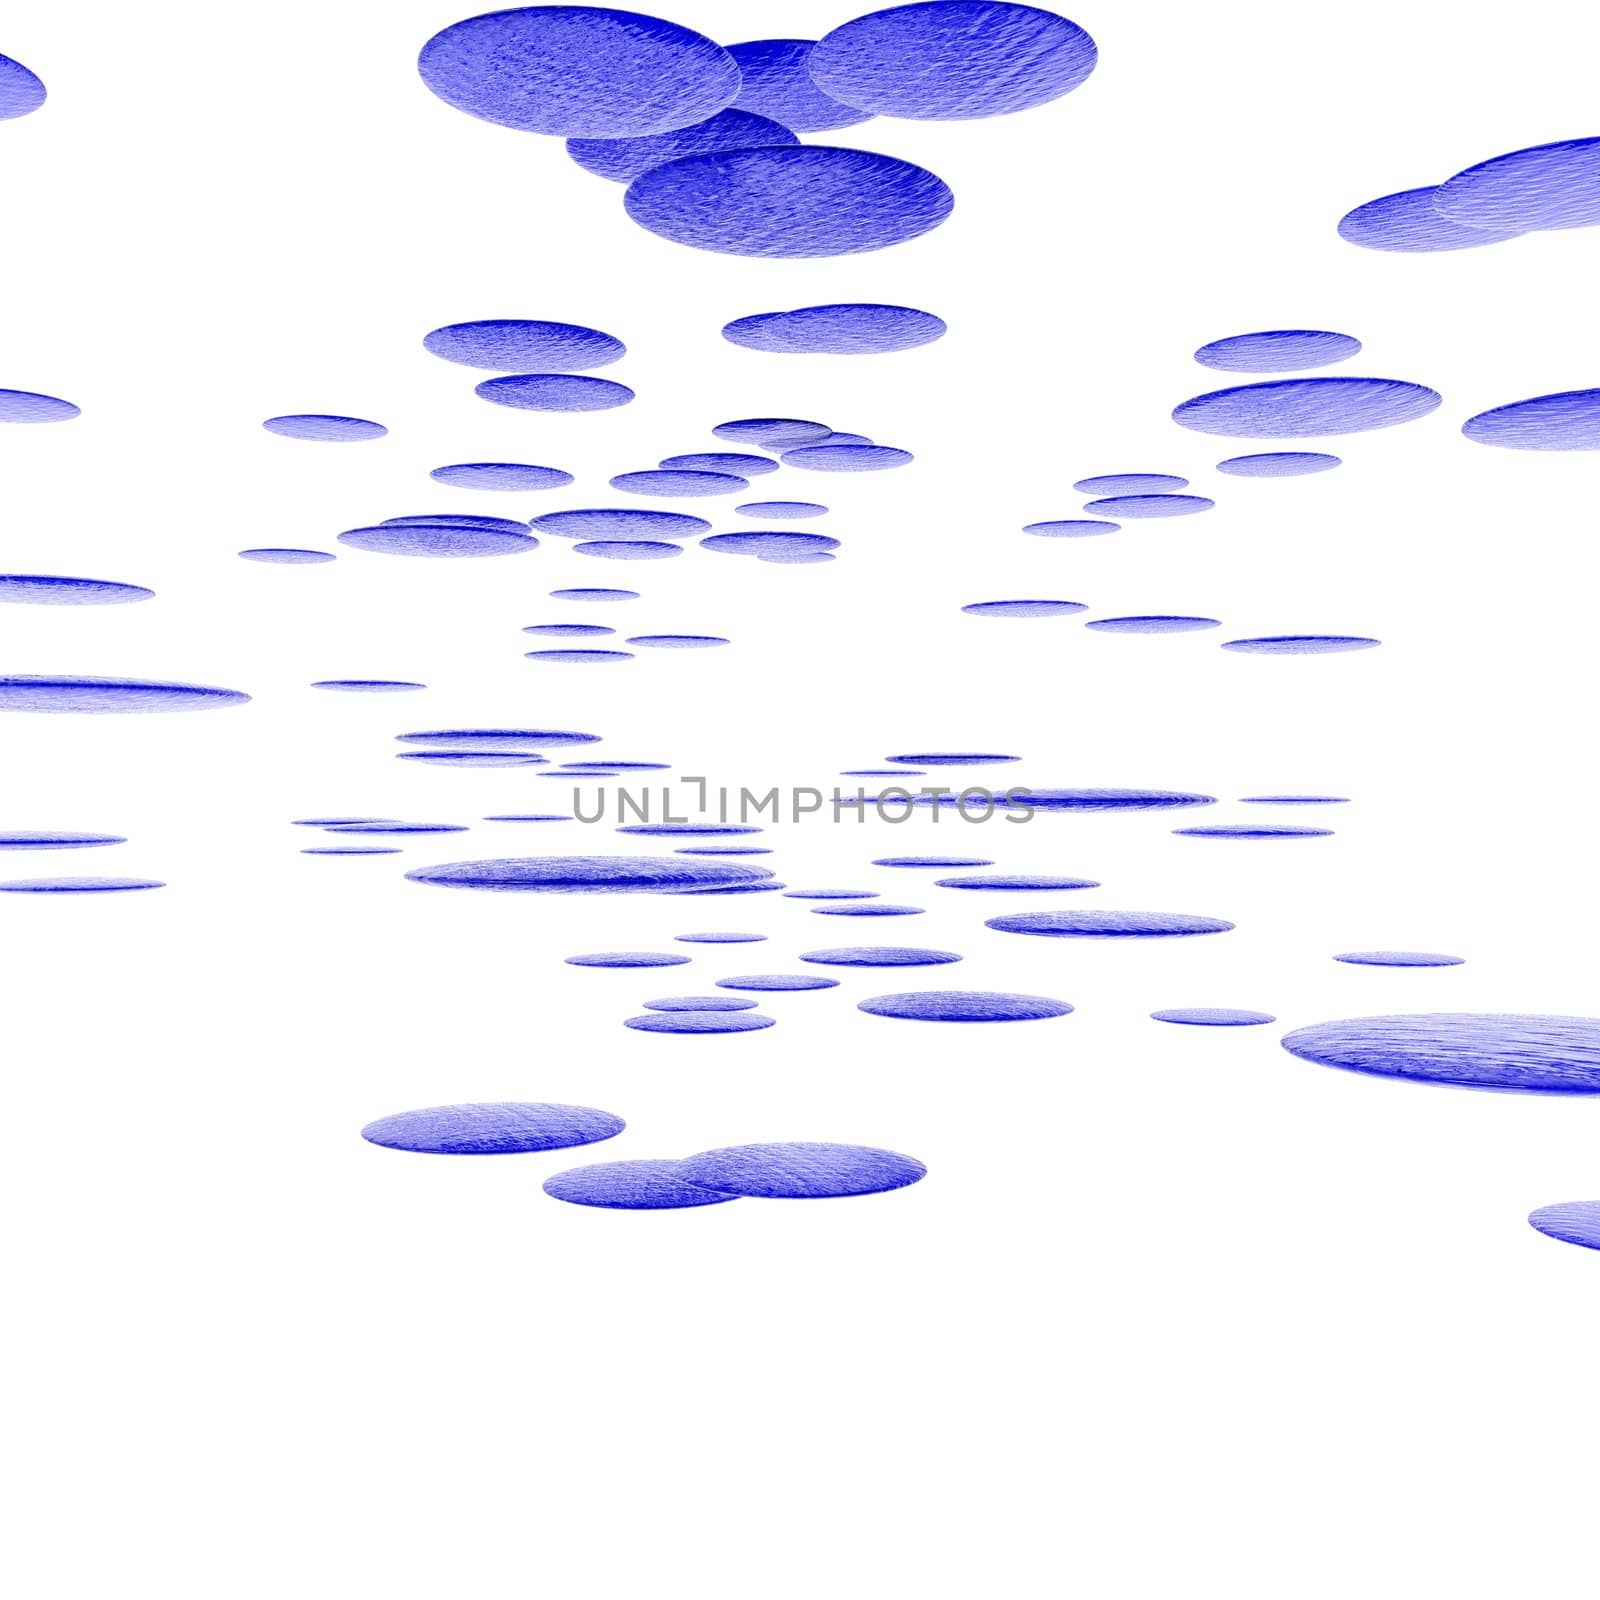 Floating disks with a watery texture on a white background.